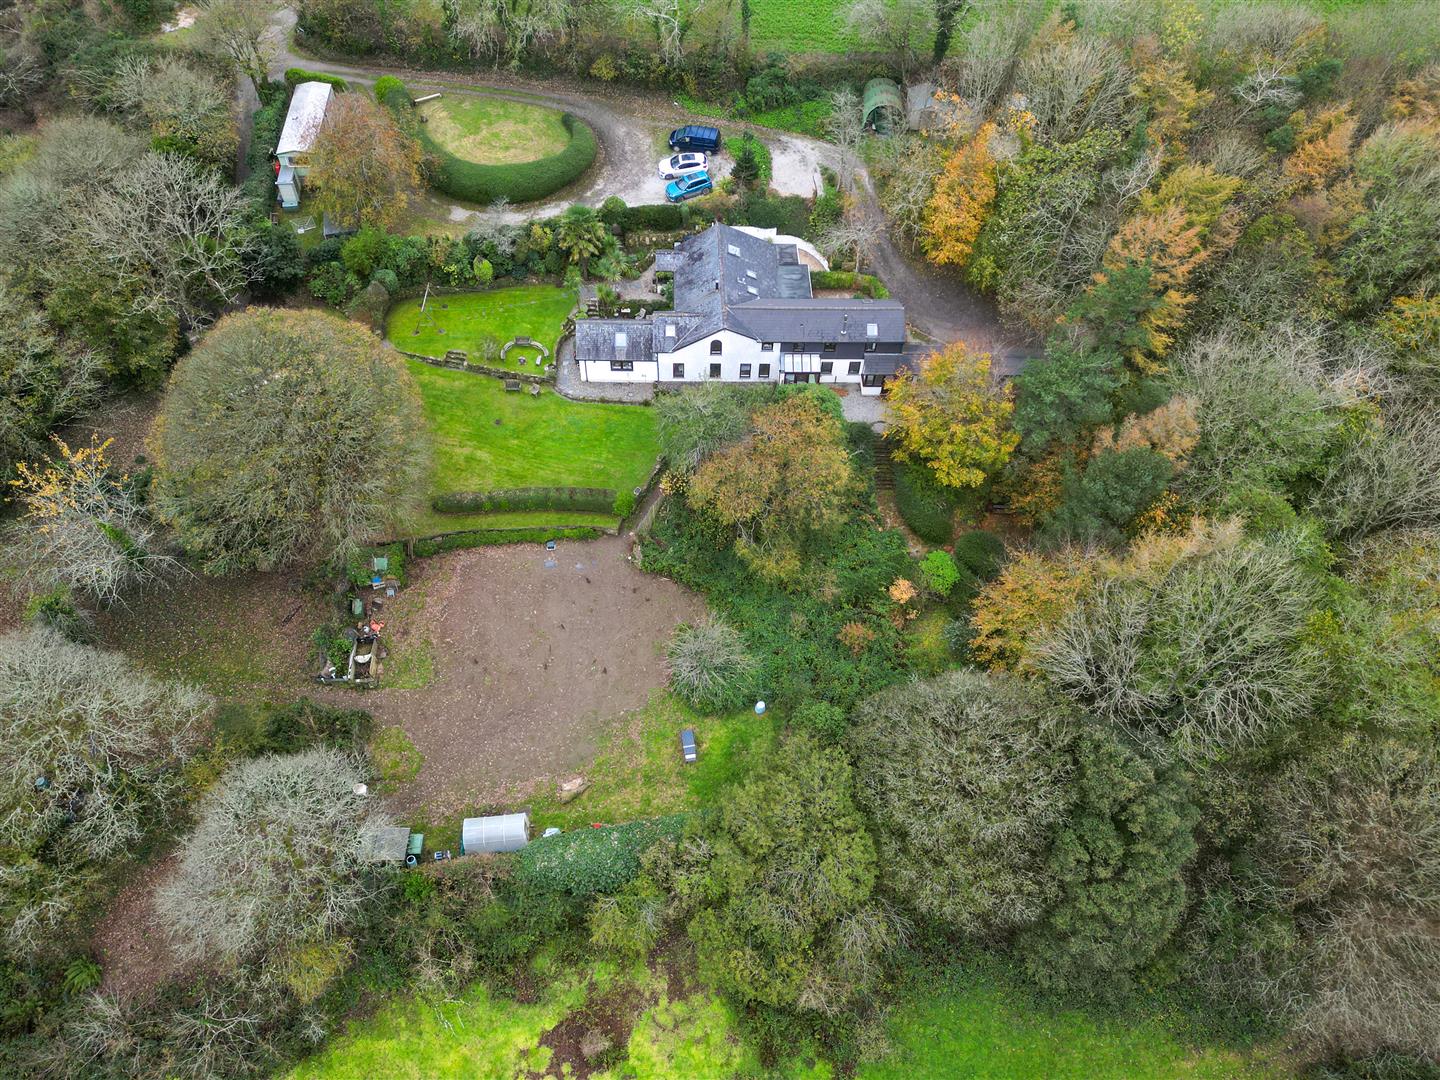 Rural Property with income streams, Millpool